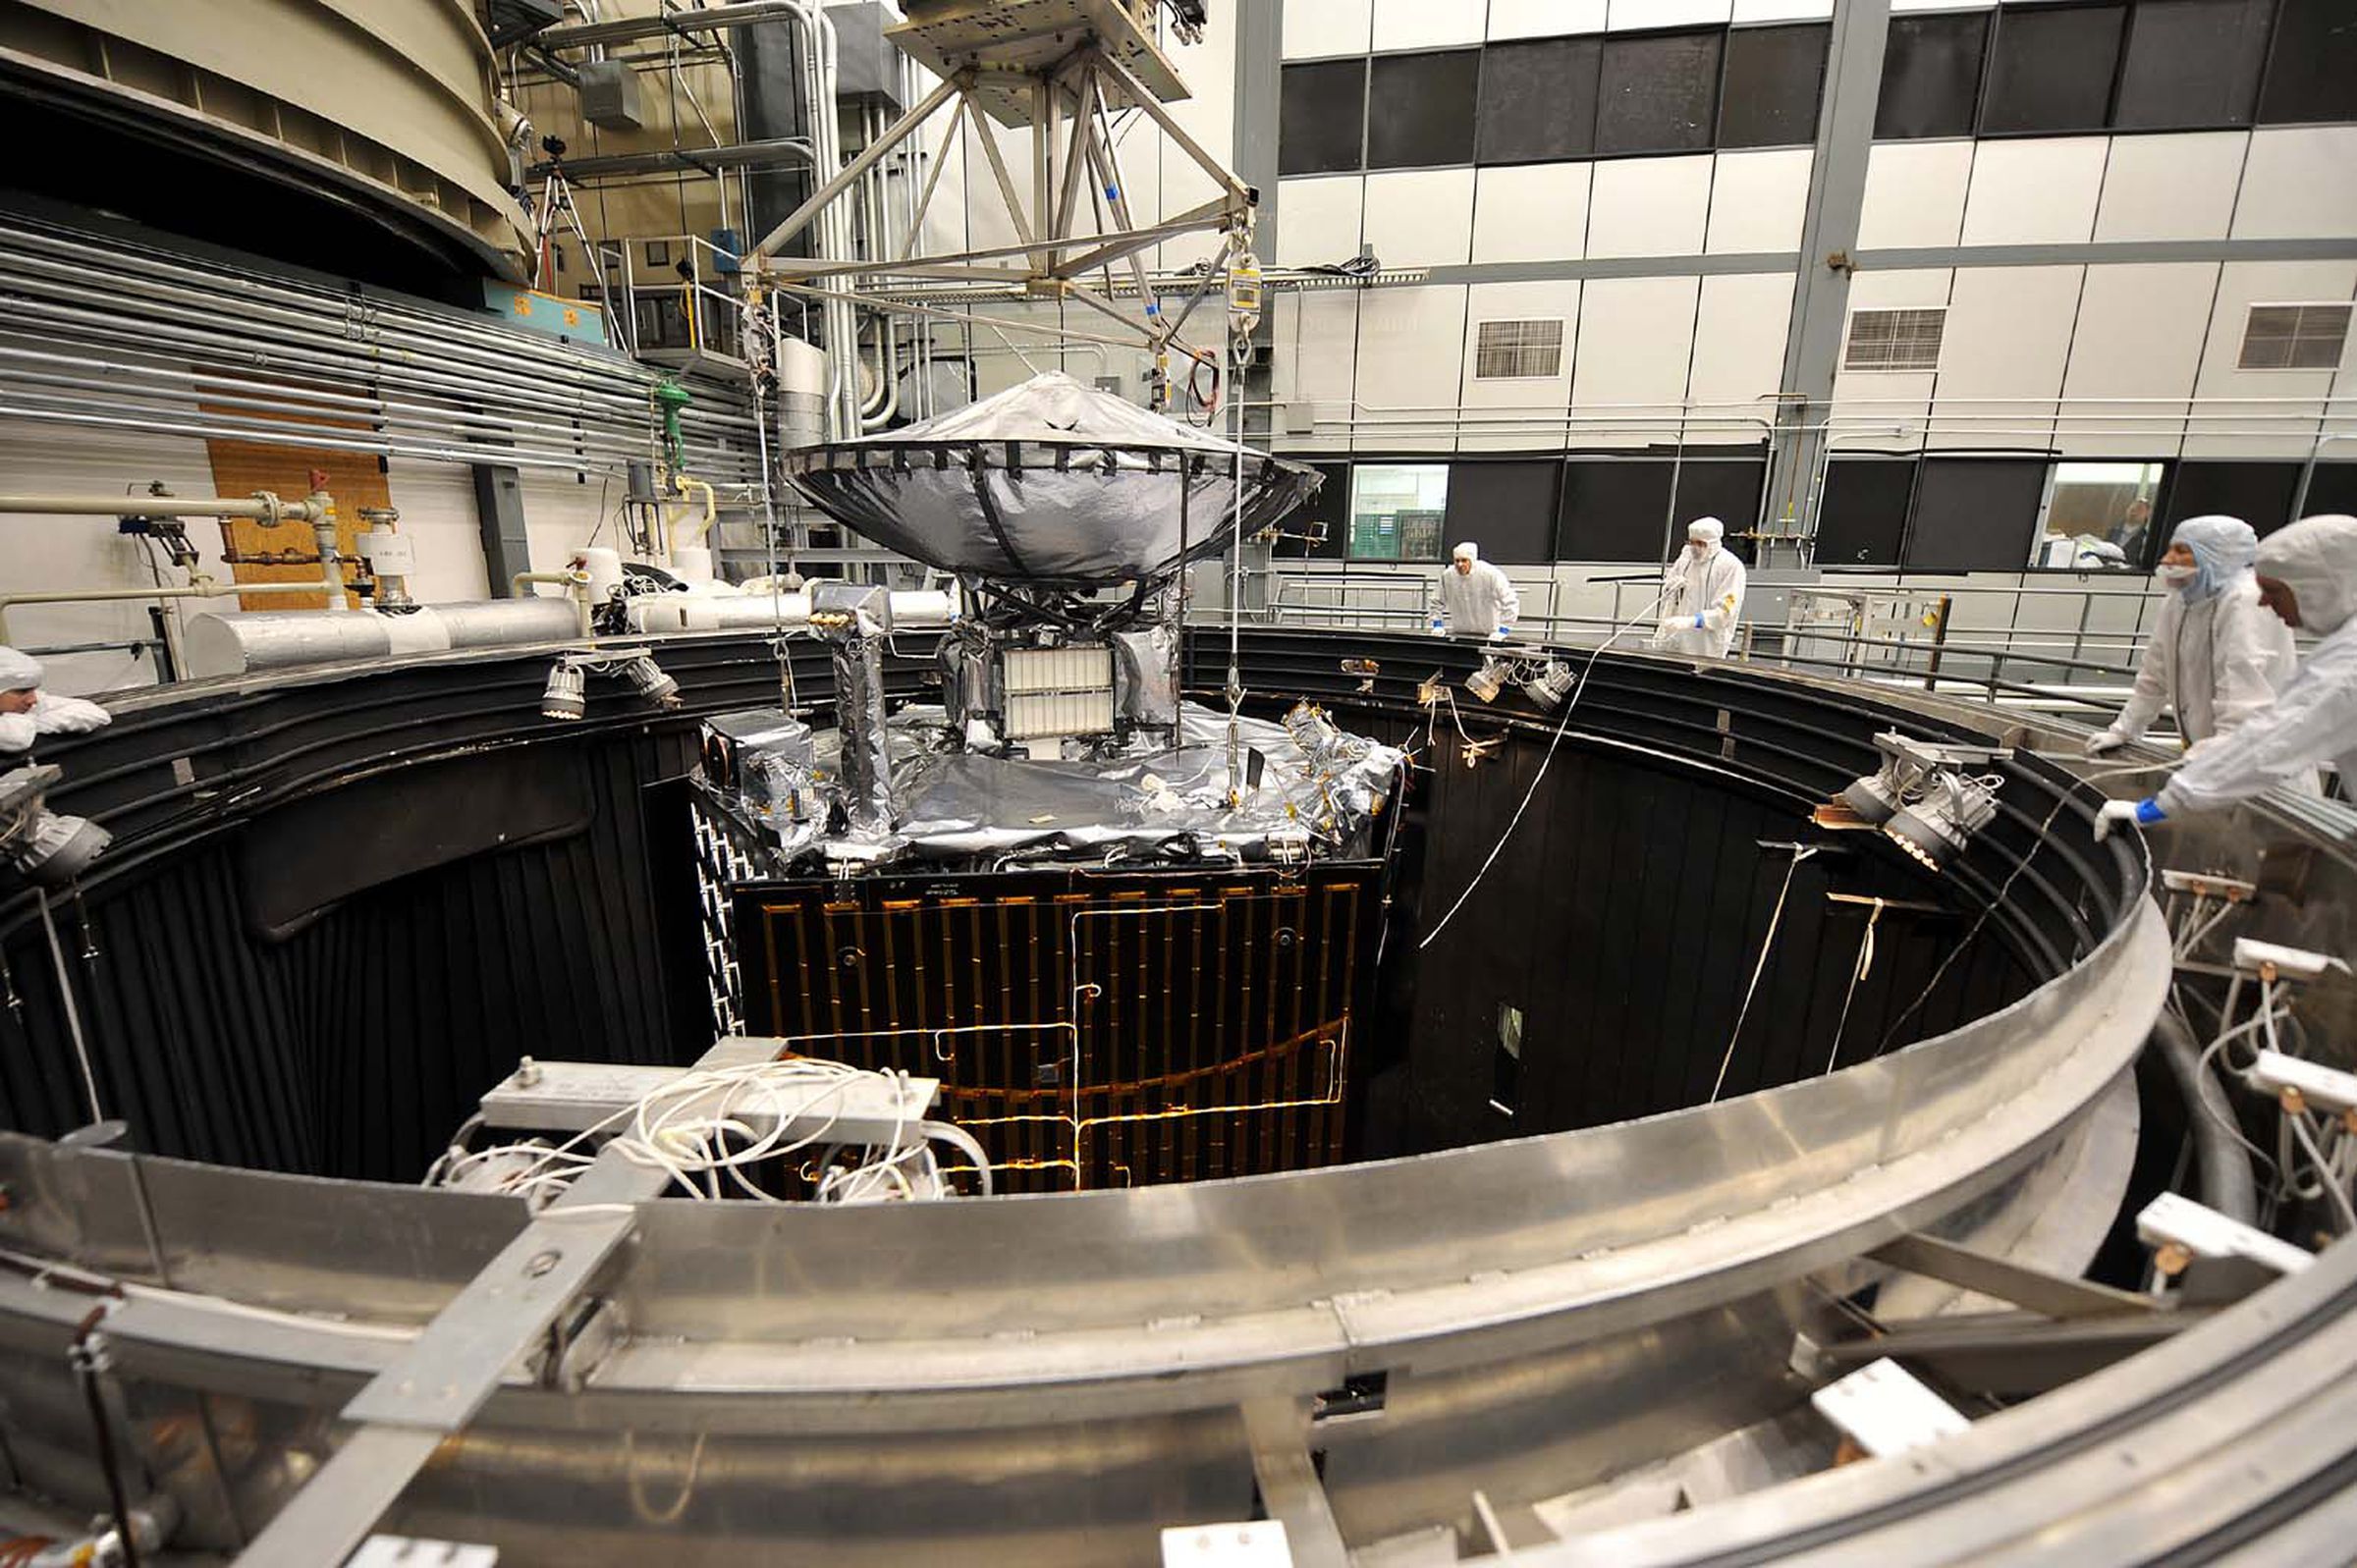 JPL is equipped with various test facilities, such as a giant vacuum chamber used to subject spacecraft to extreme environments.